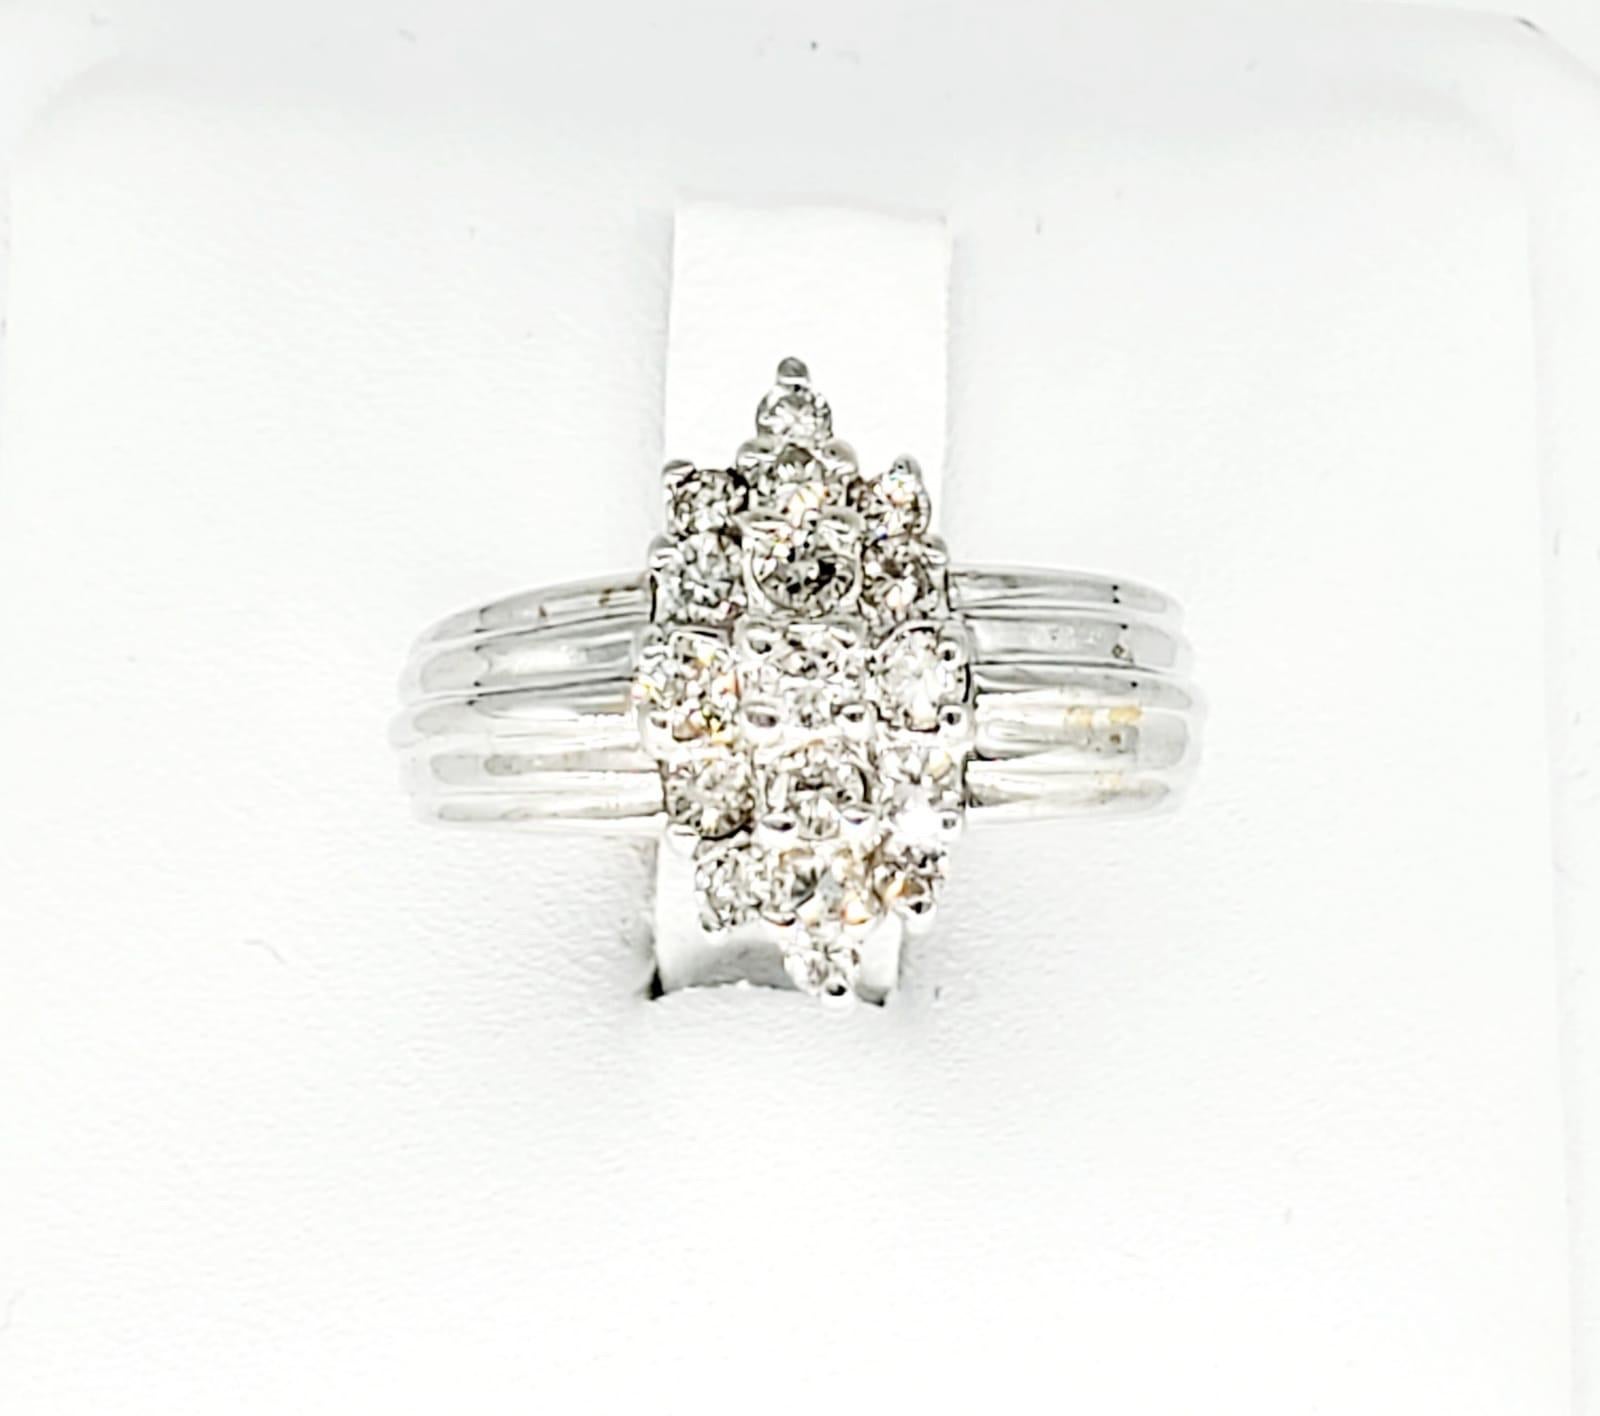 Vintage 1.70 Carat Diamonds Cluster Ring 14 Karat White Gold In Excellent Condition For Sale In Miami, FL